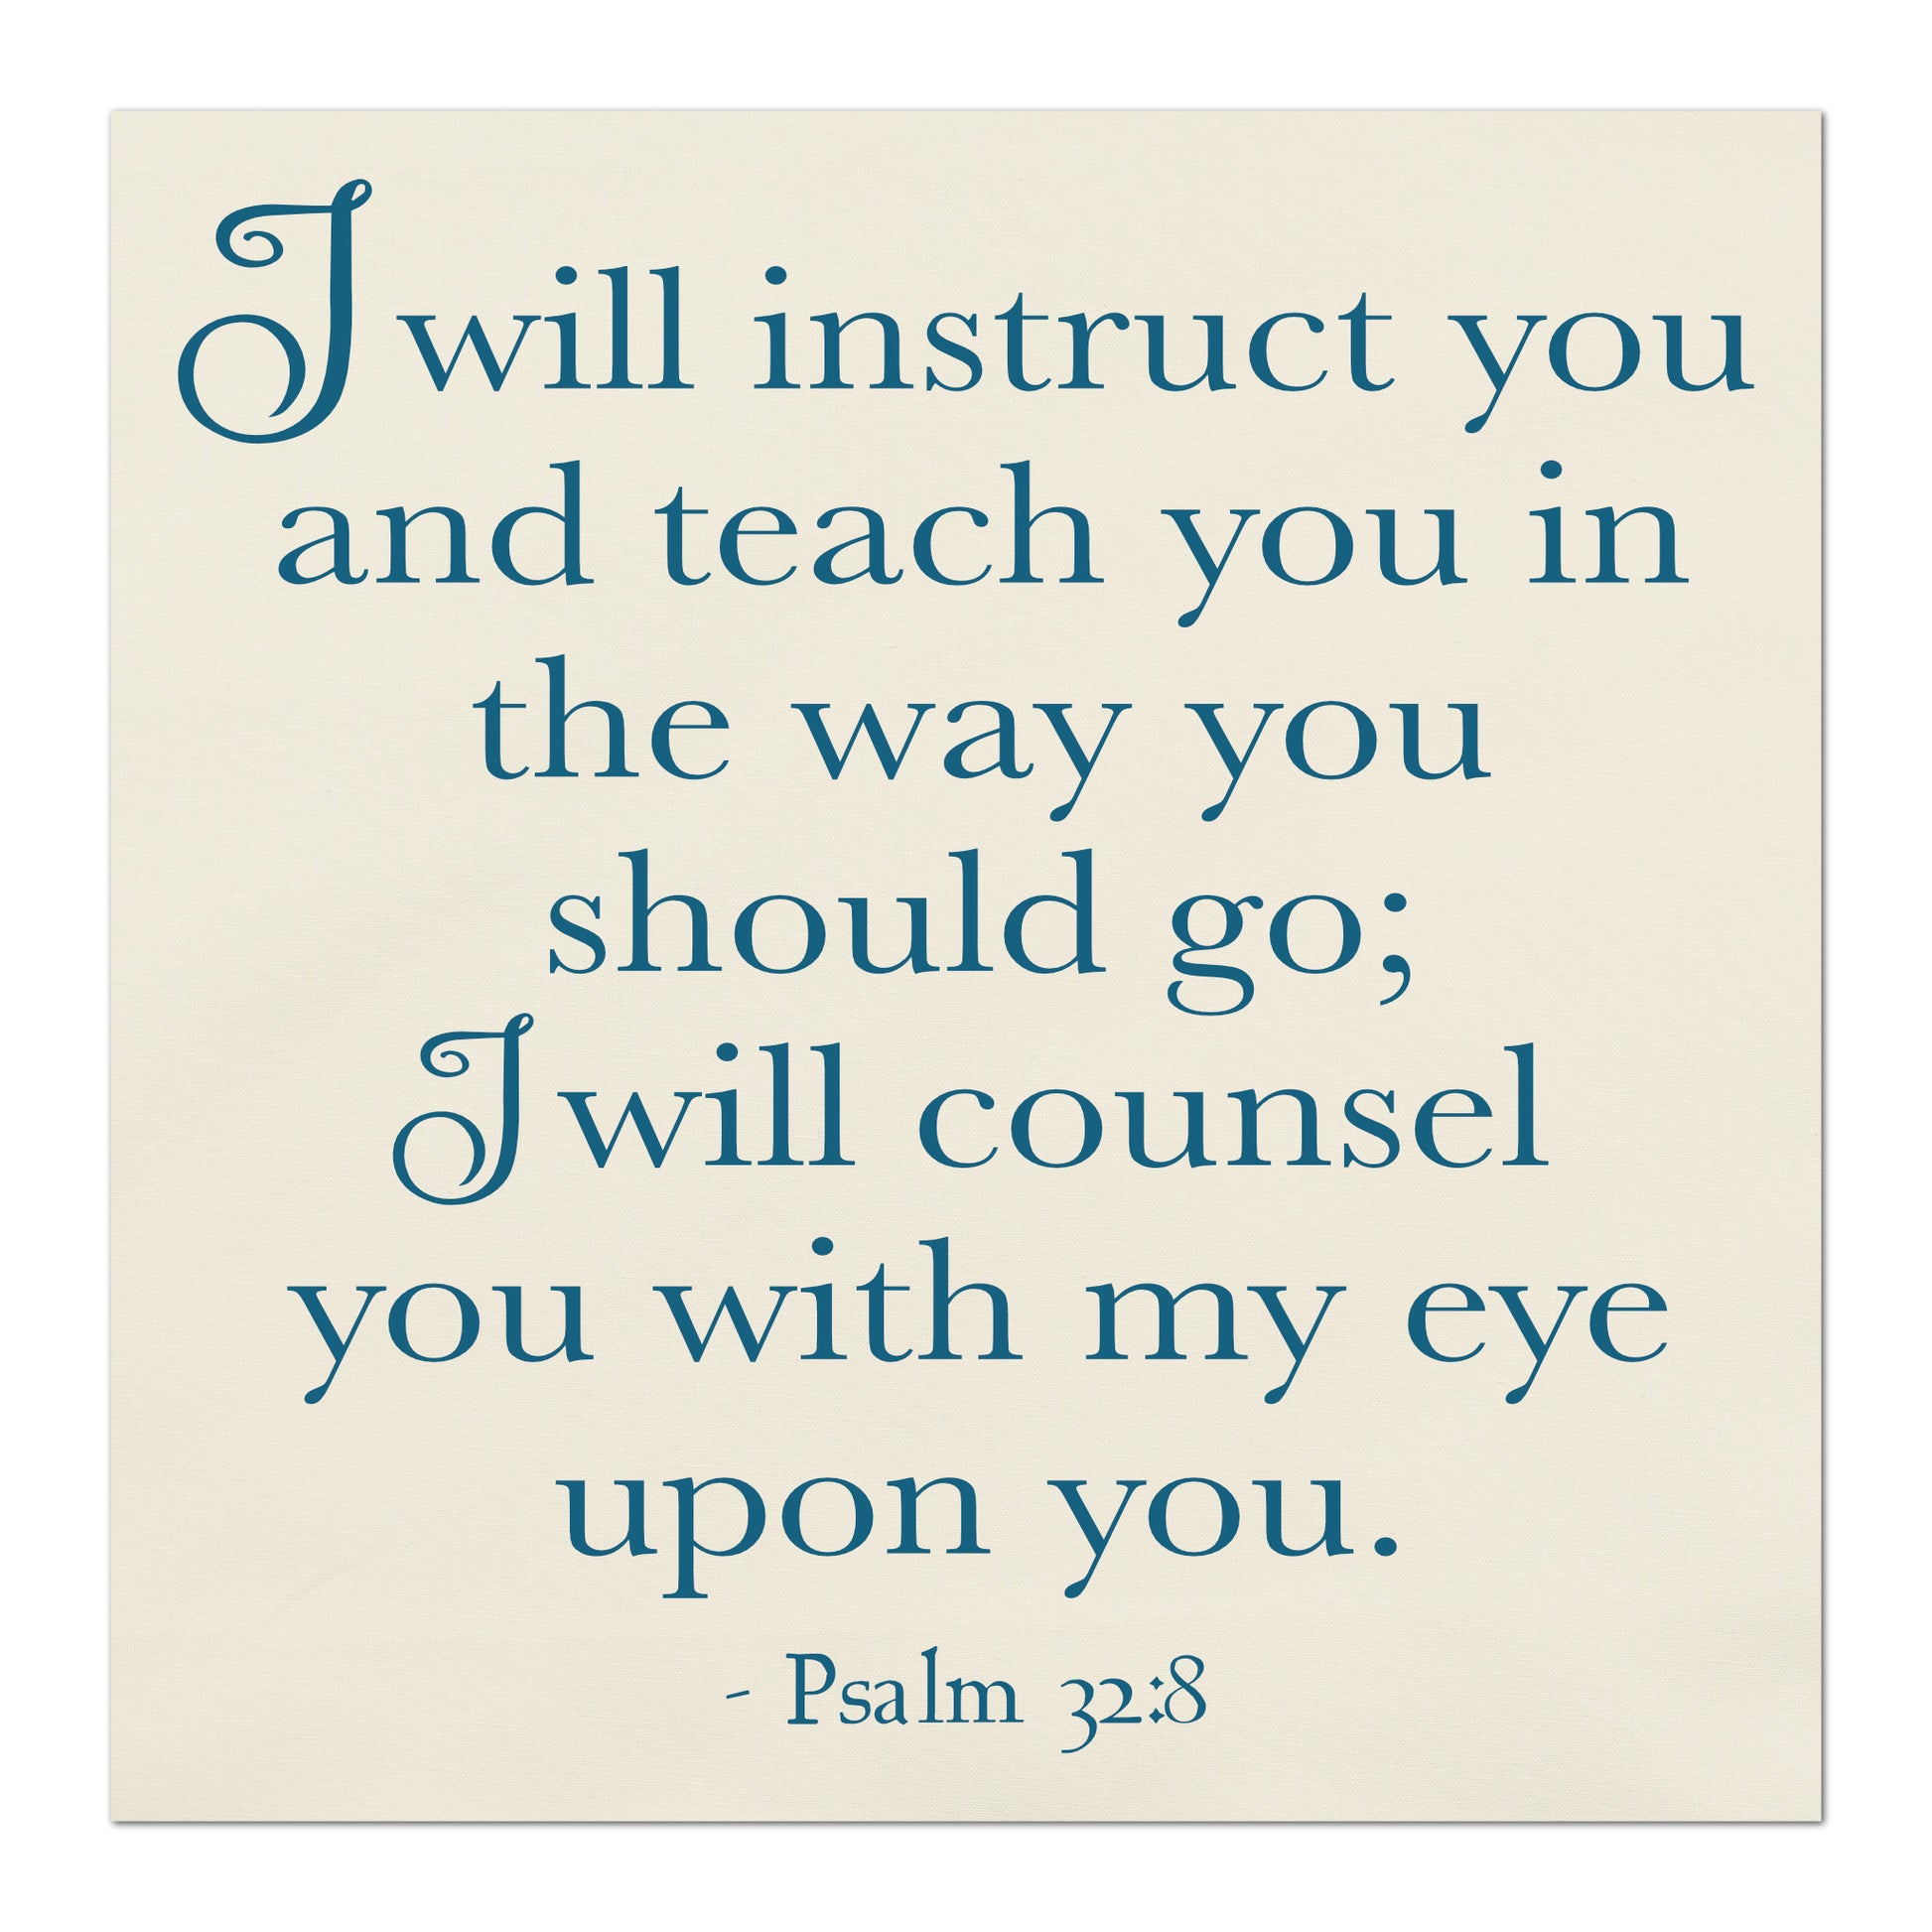 I will instruct you and teach you in the way you should go;  I will counsel you with my eye upon you - Psalm 32 8 - Fabric Panel Print, Scripture Fabric, Religious Art, Quilt Block, Large Print Fabric